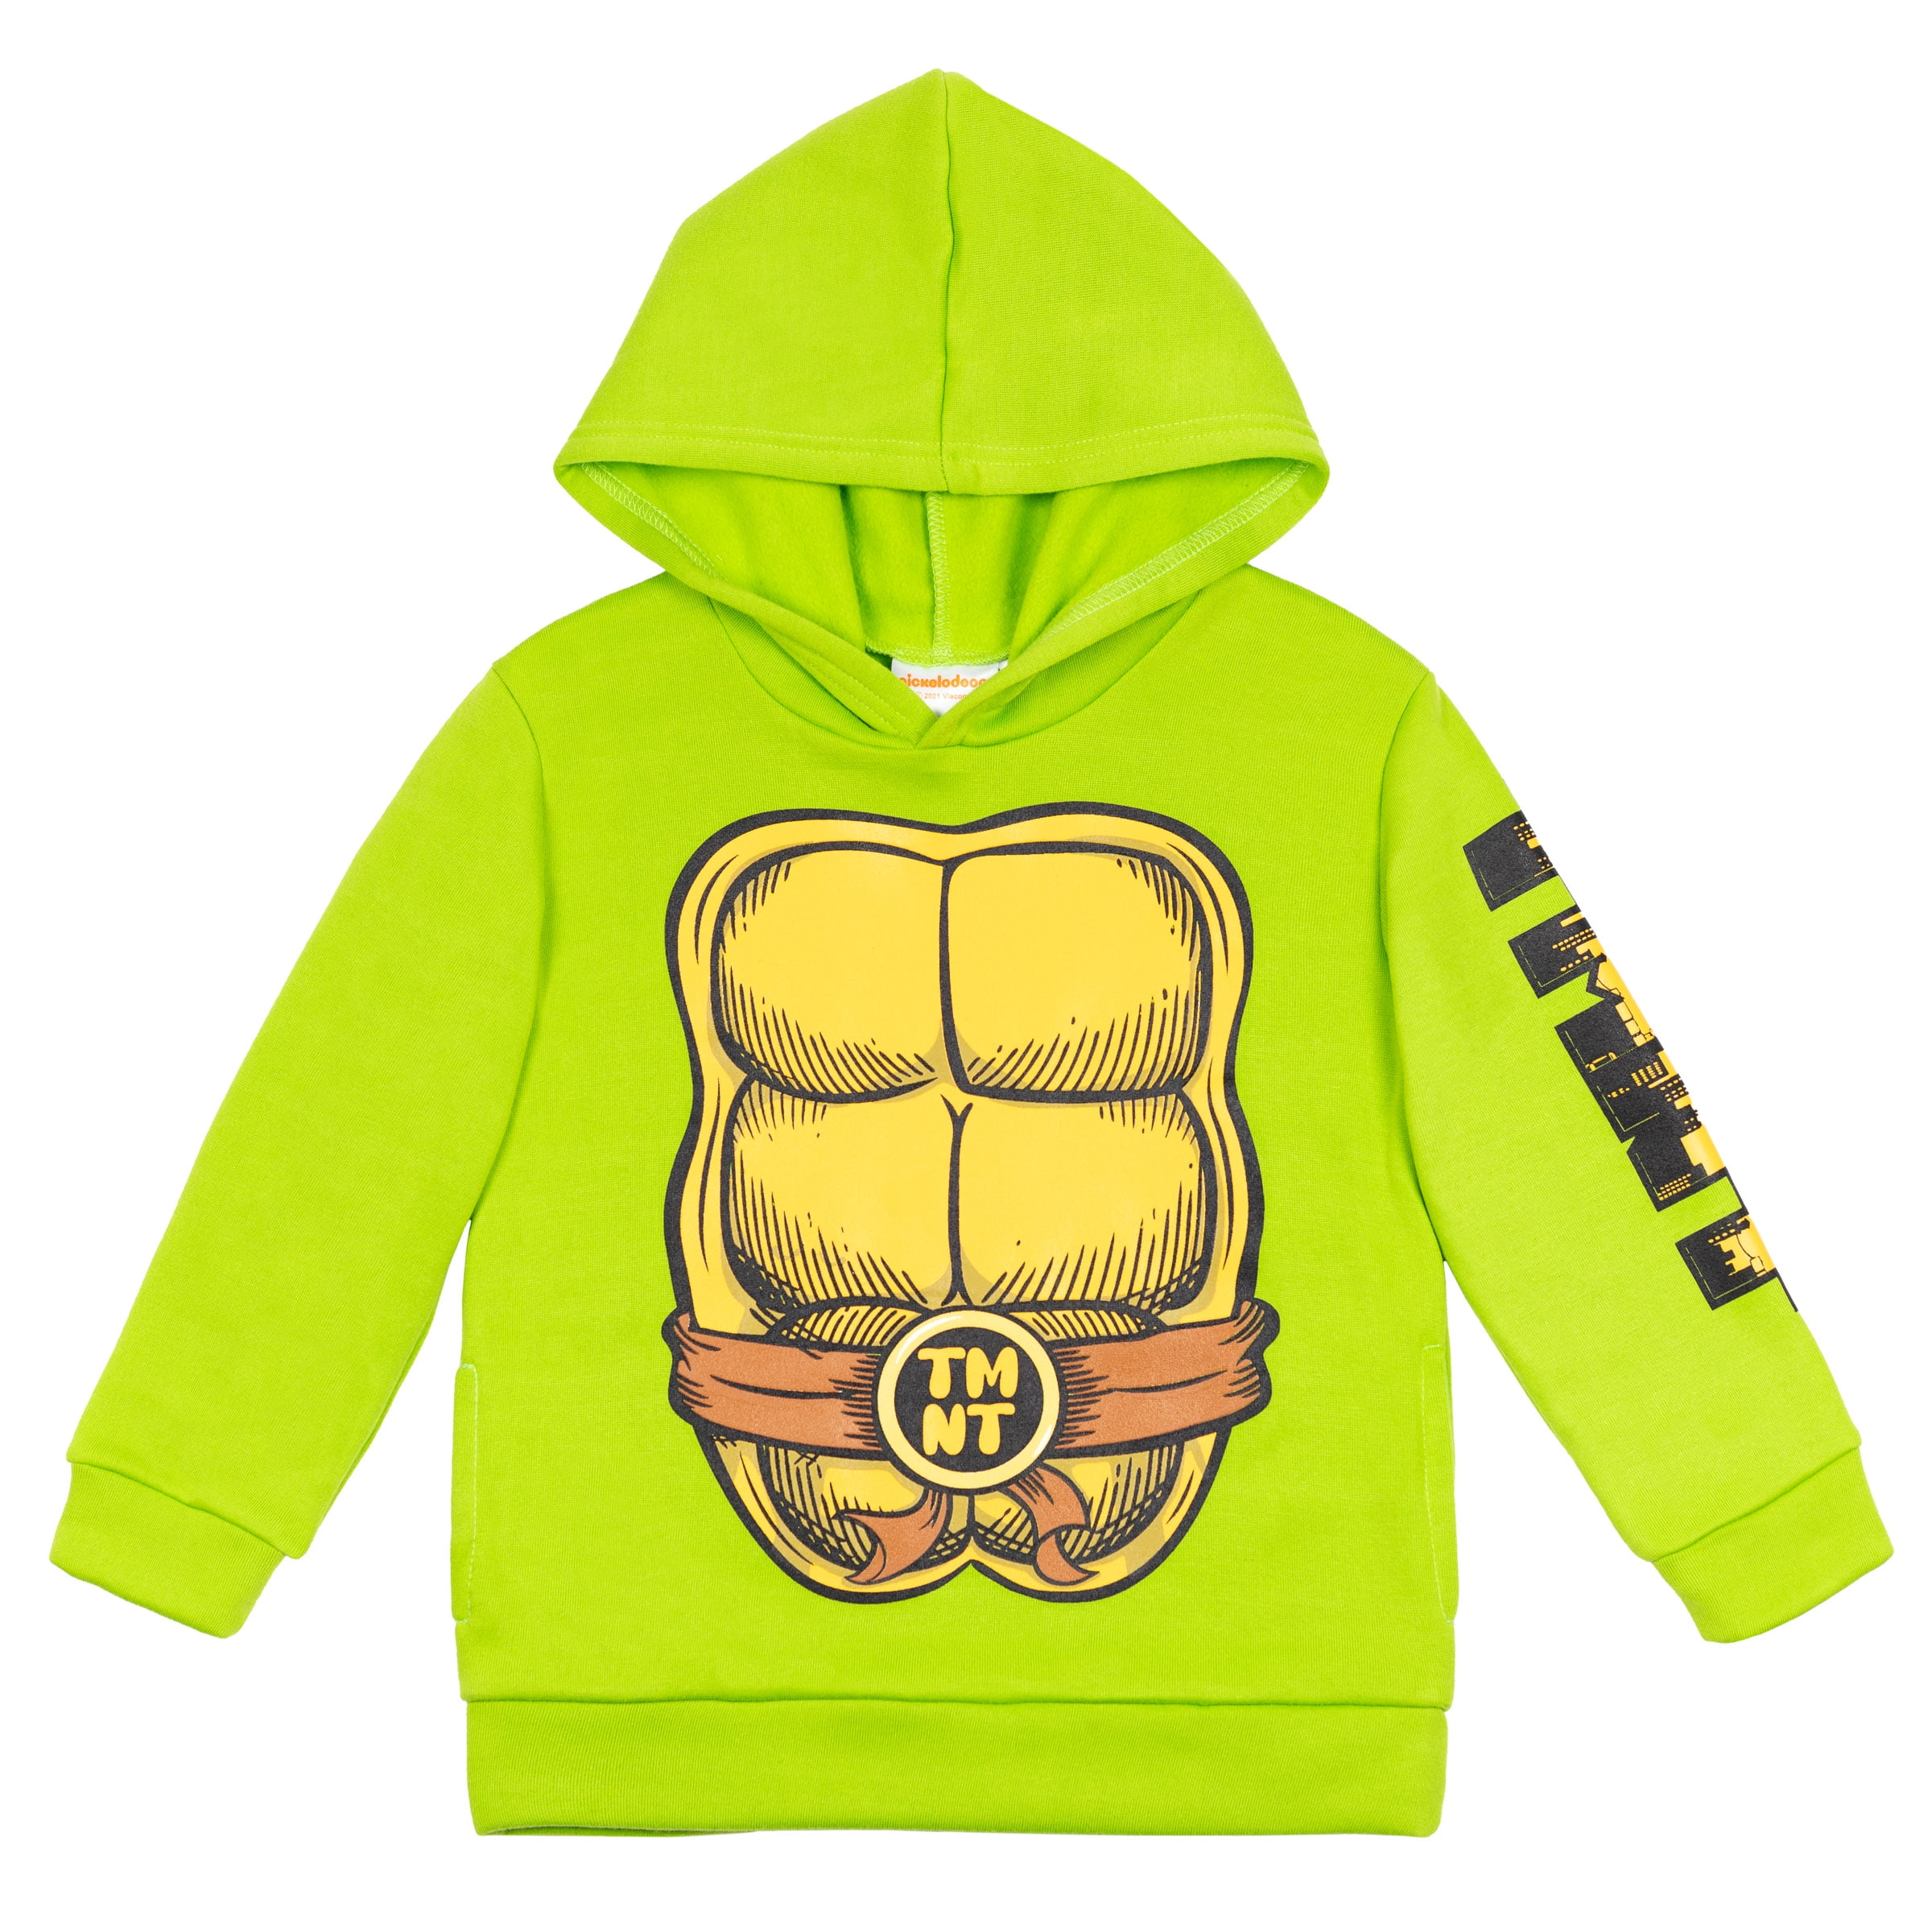 Line Art Freestyle Turtles,Men/Womens Warm Outerwear Jackets and Hoodies S